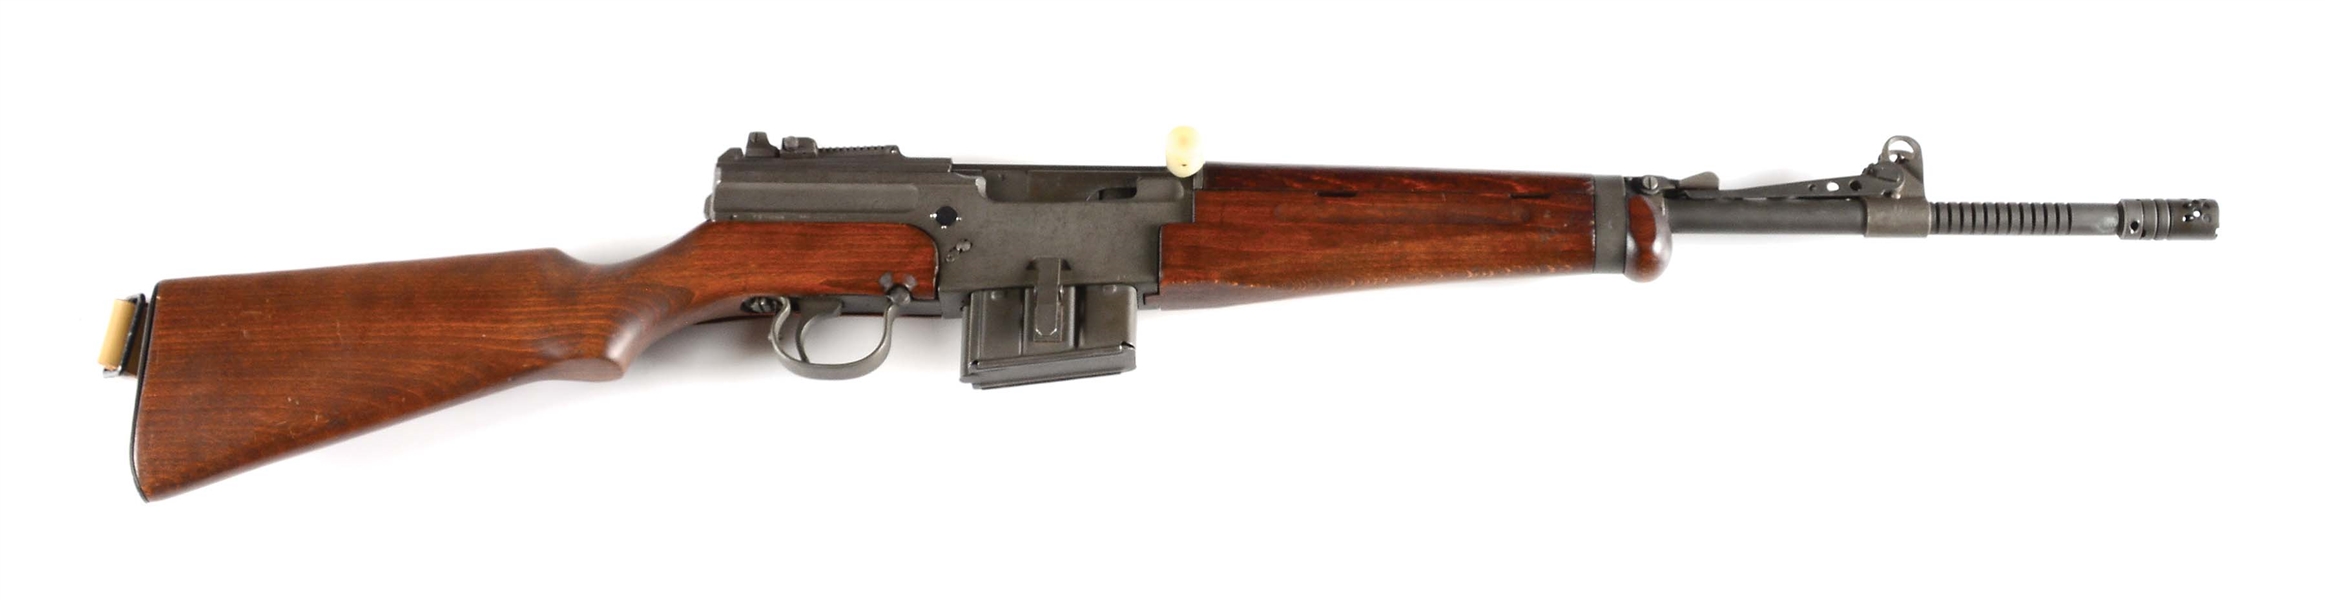 (C) COMMERCIAL PROOFED FRENCH MAS MLE 1949-56 SEMI-AUTOMATIC RIFLE.